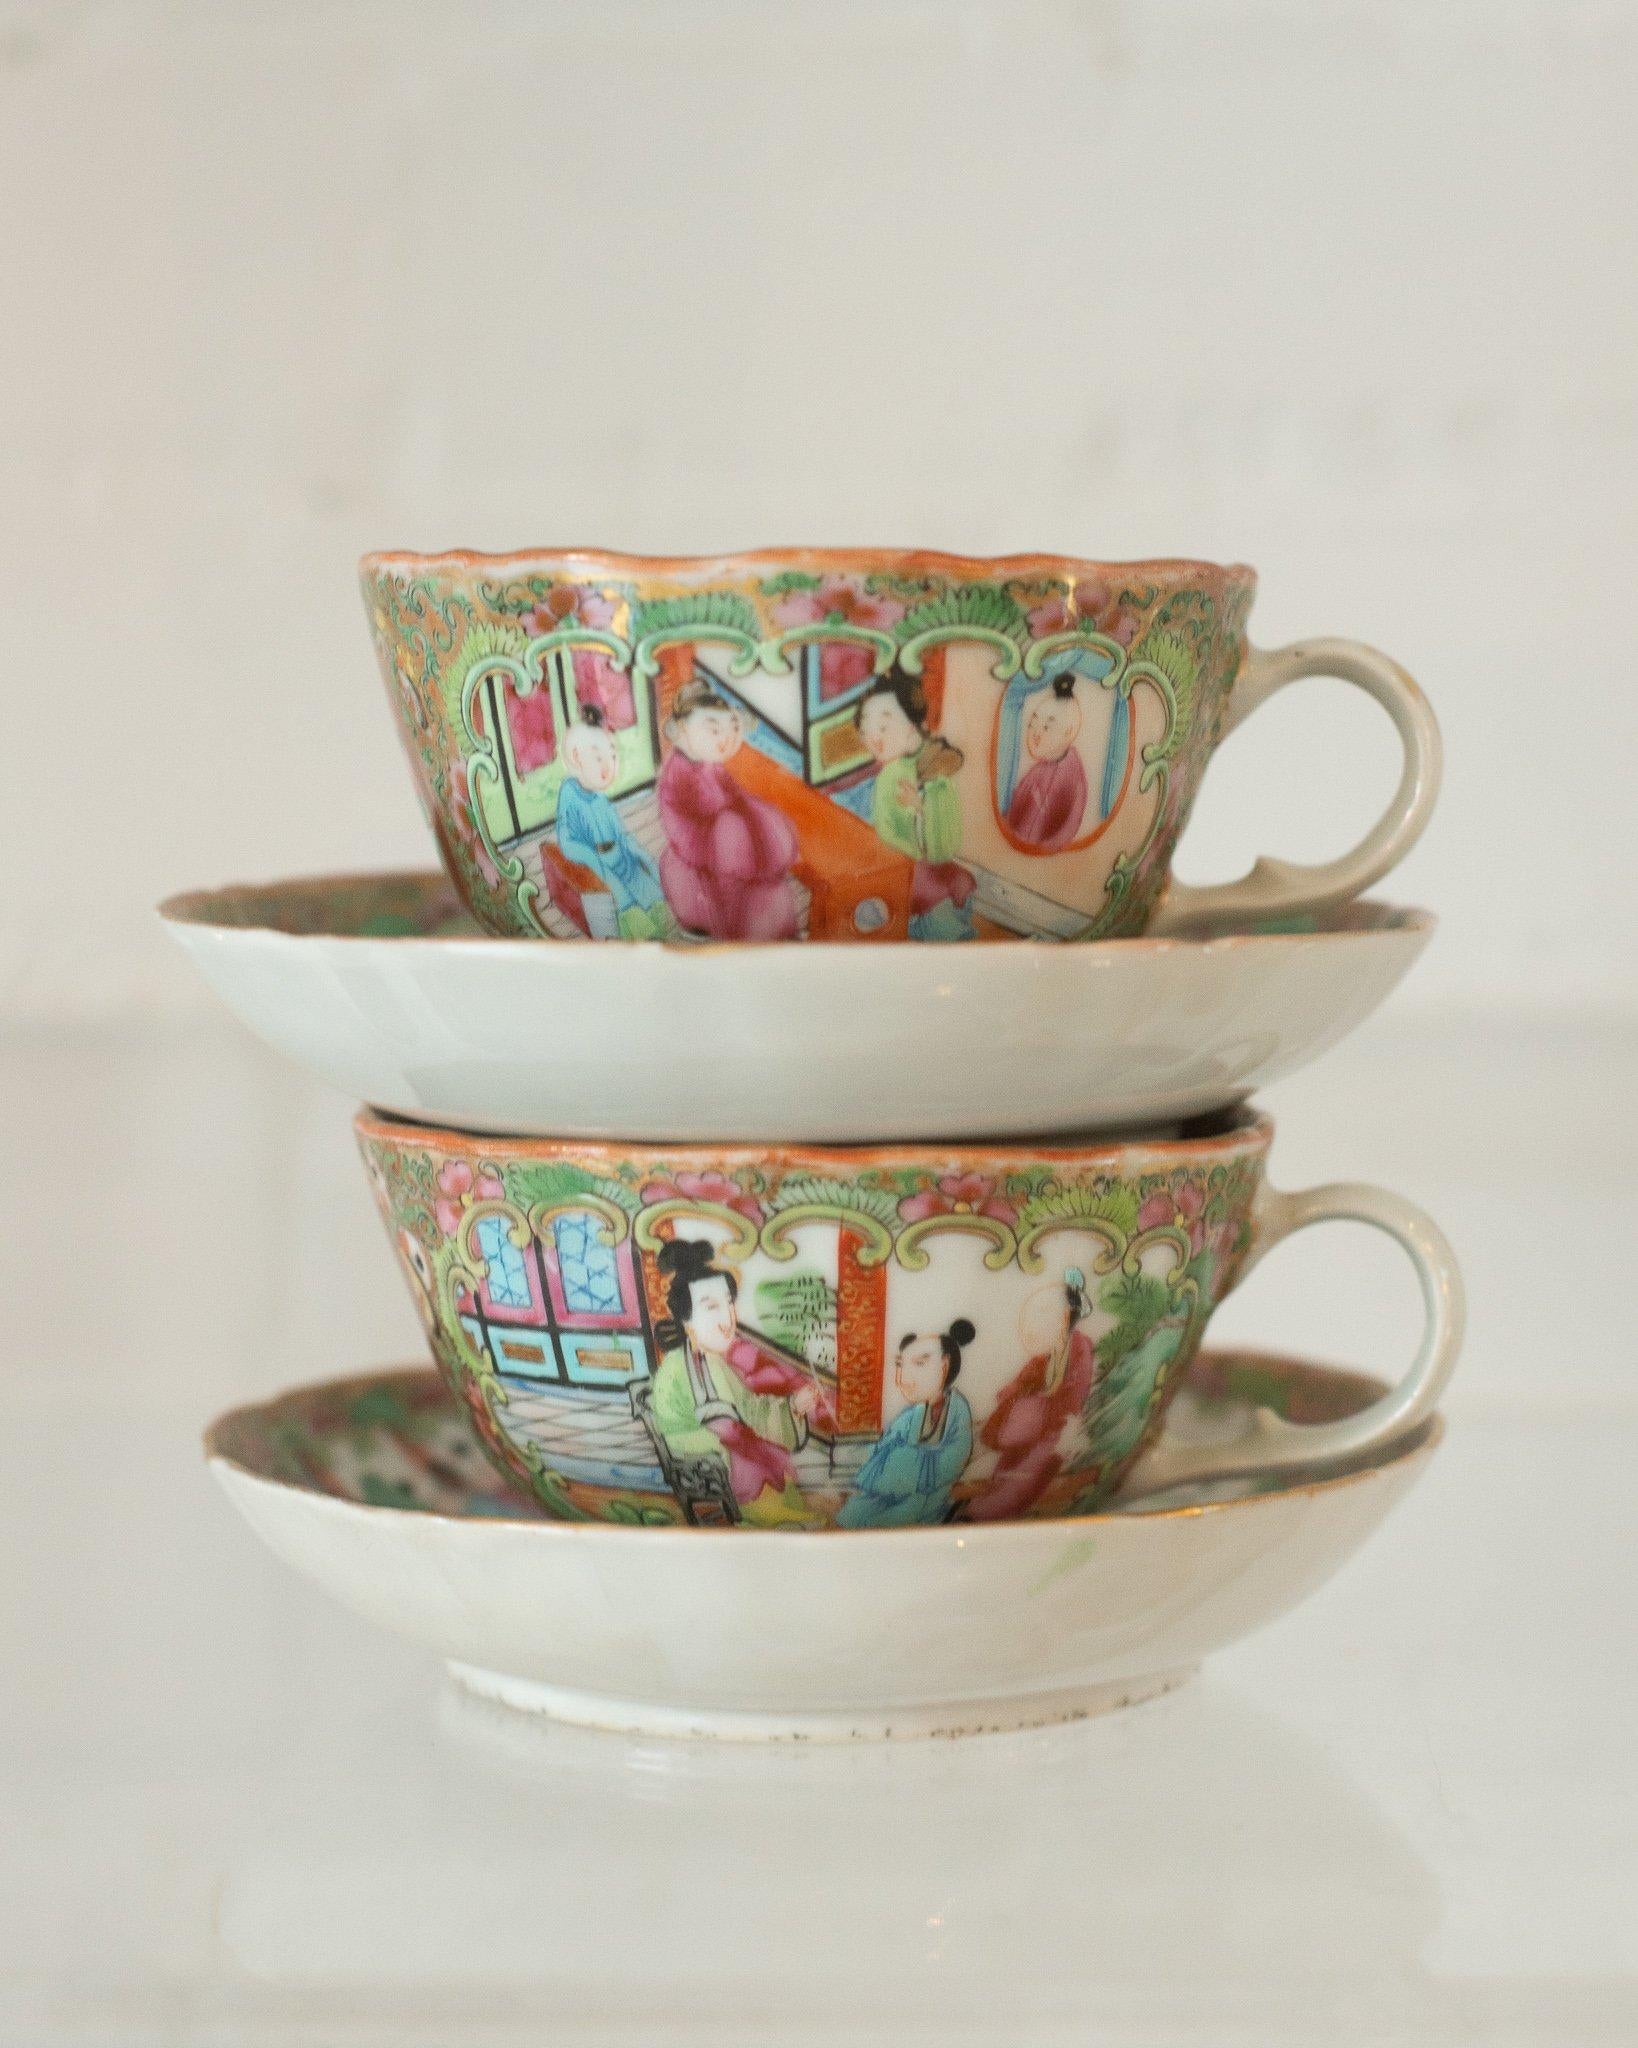 The practice of drinking tea is an institution in Asian Culture. Bring this ancient tradition into the modern day with our antique Chinese rose medallion teacups and saucers. Perfect for afternoon tea with your friends, these elegant pairs of